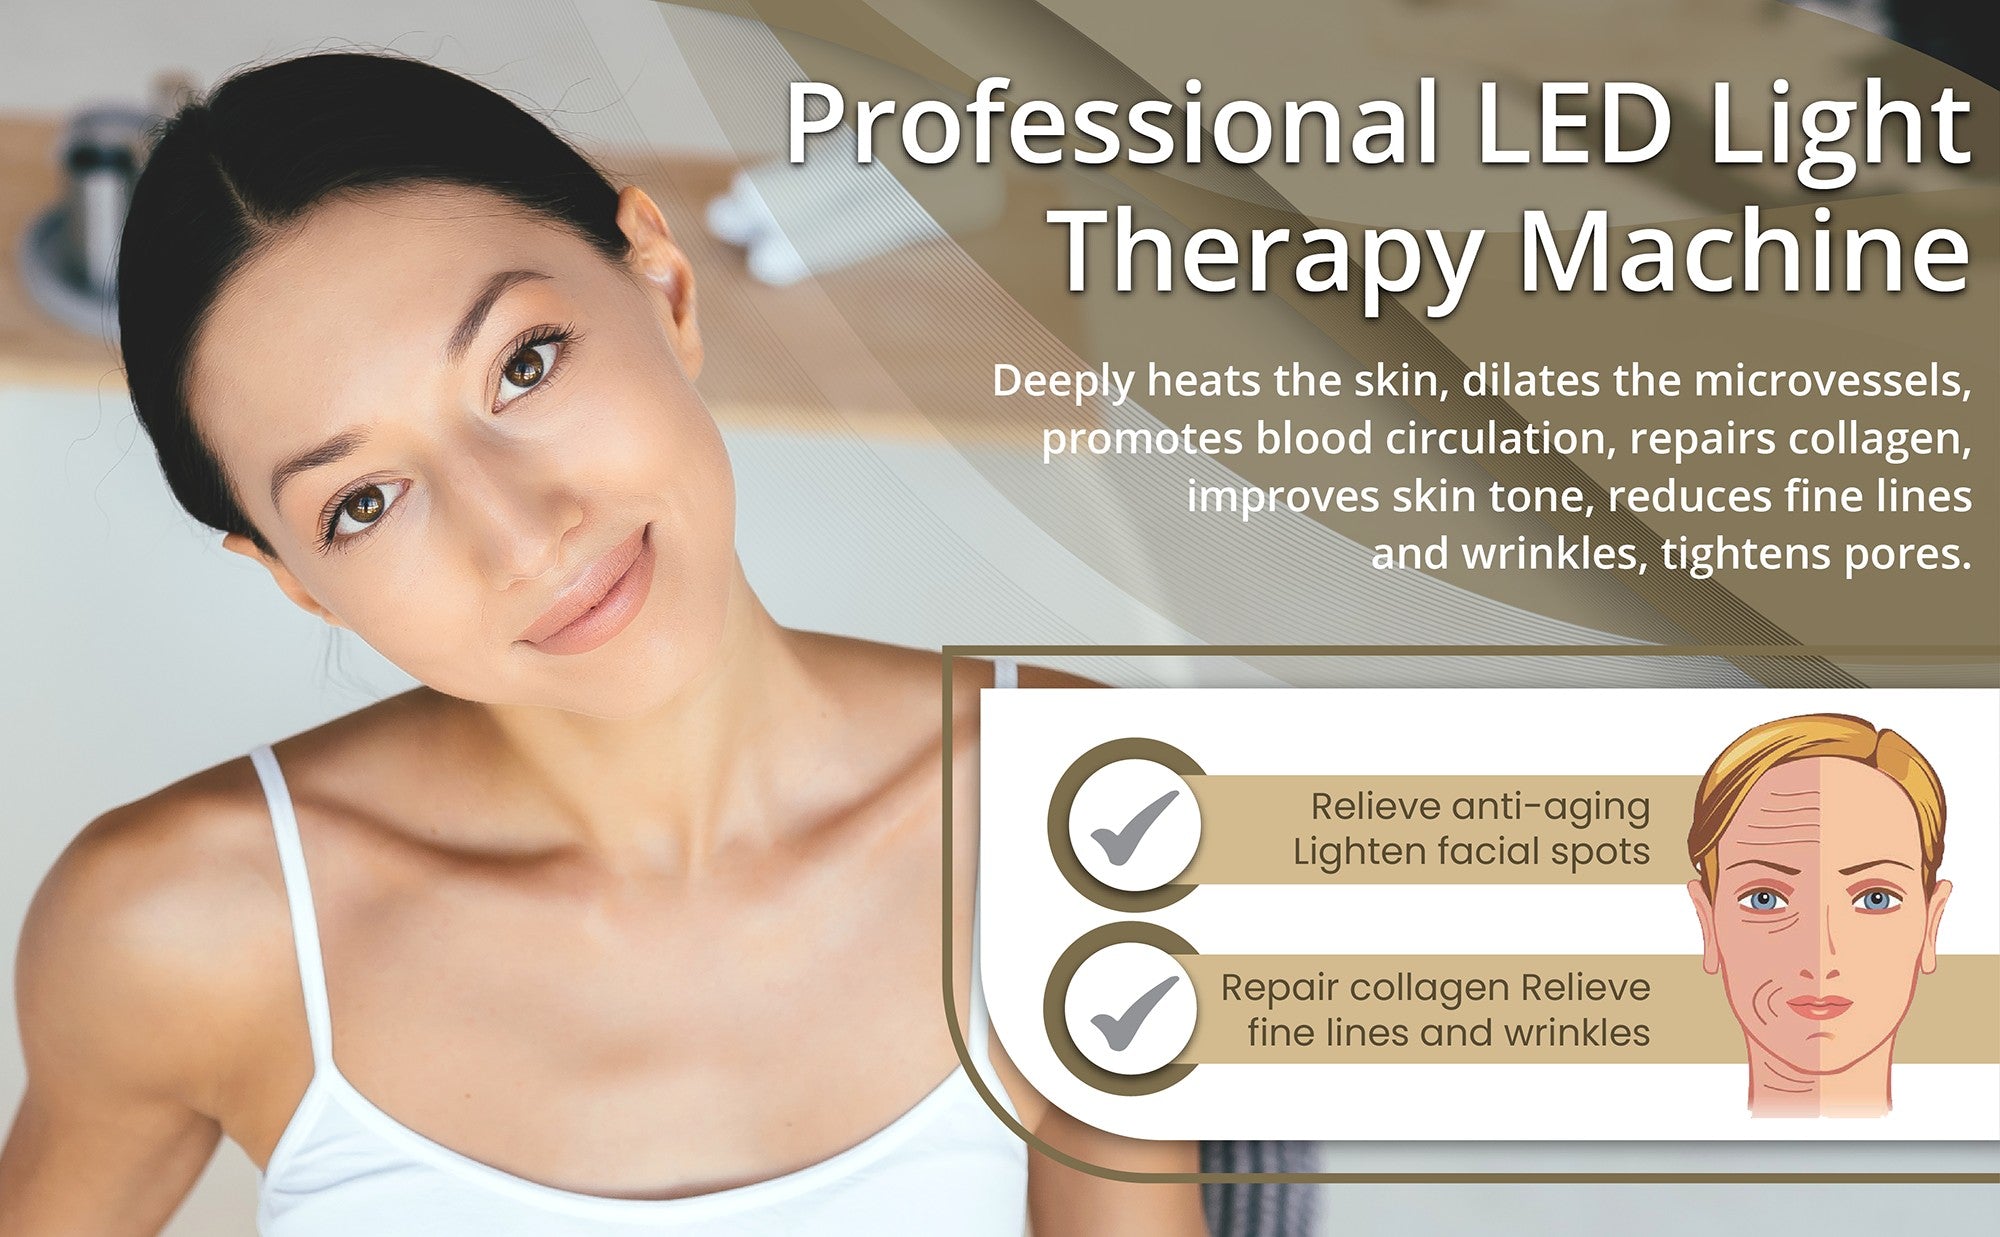 The Effectiveness of LED Light Therapy for Wrinkles